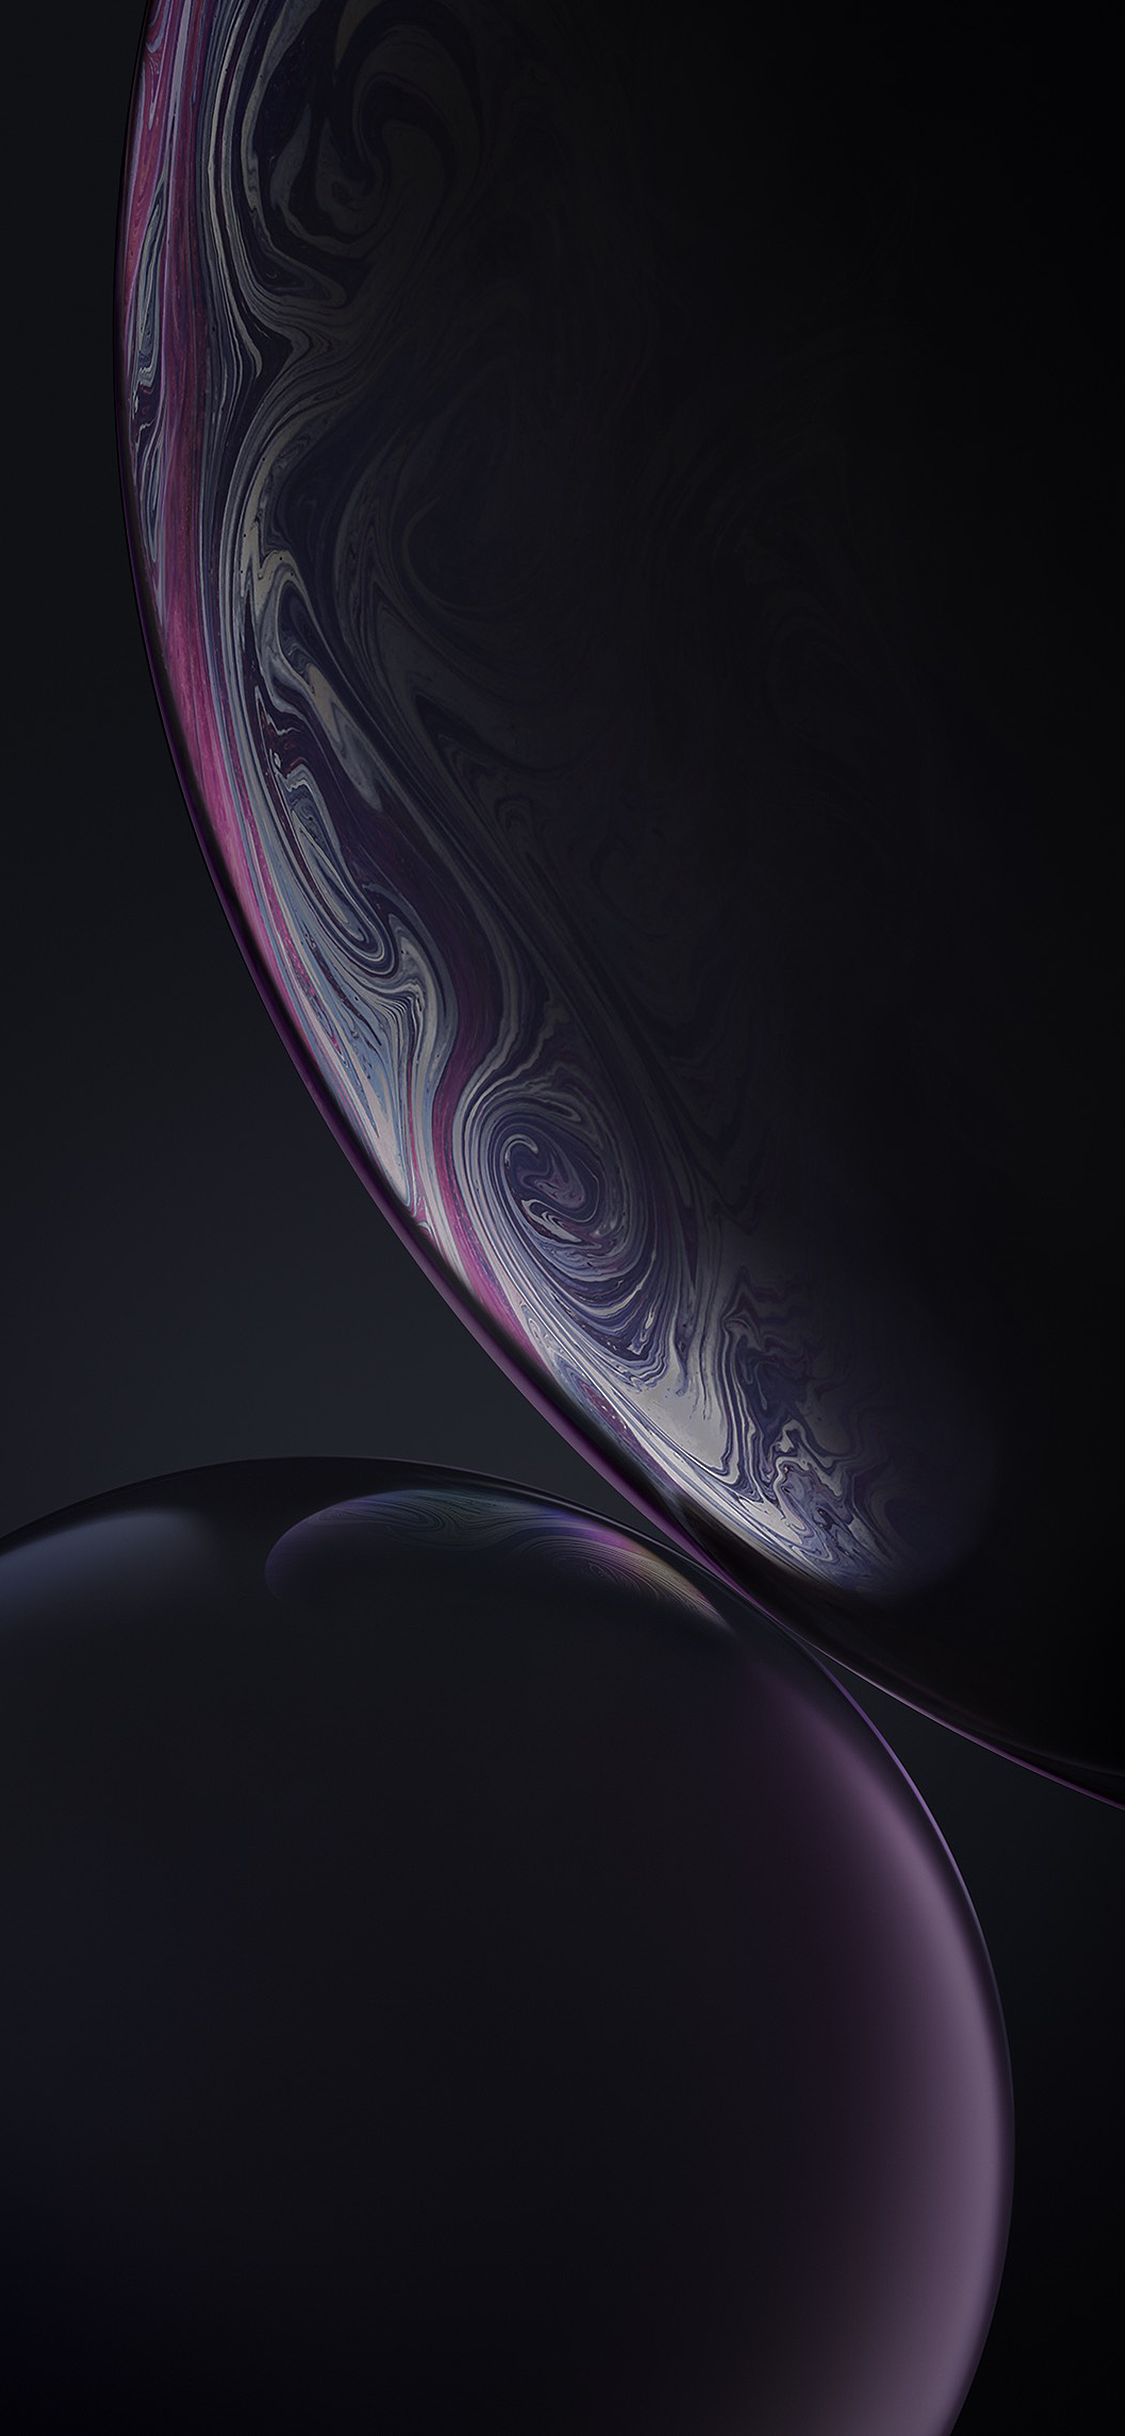 Iphone Xr Stock Wallpaper - Black - Wallpapers Central